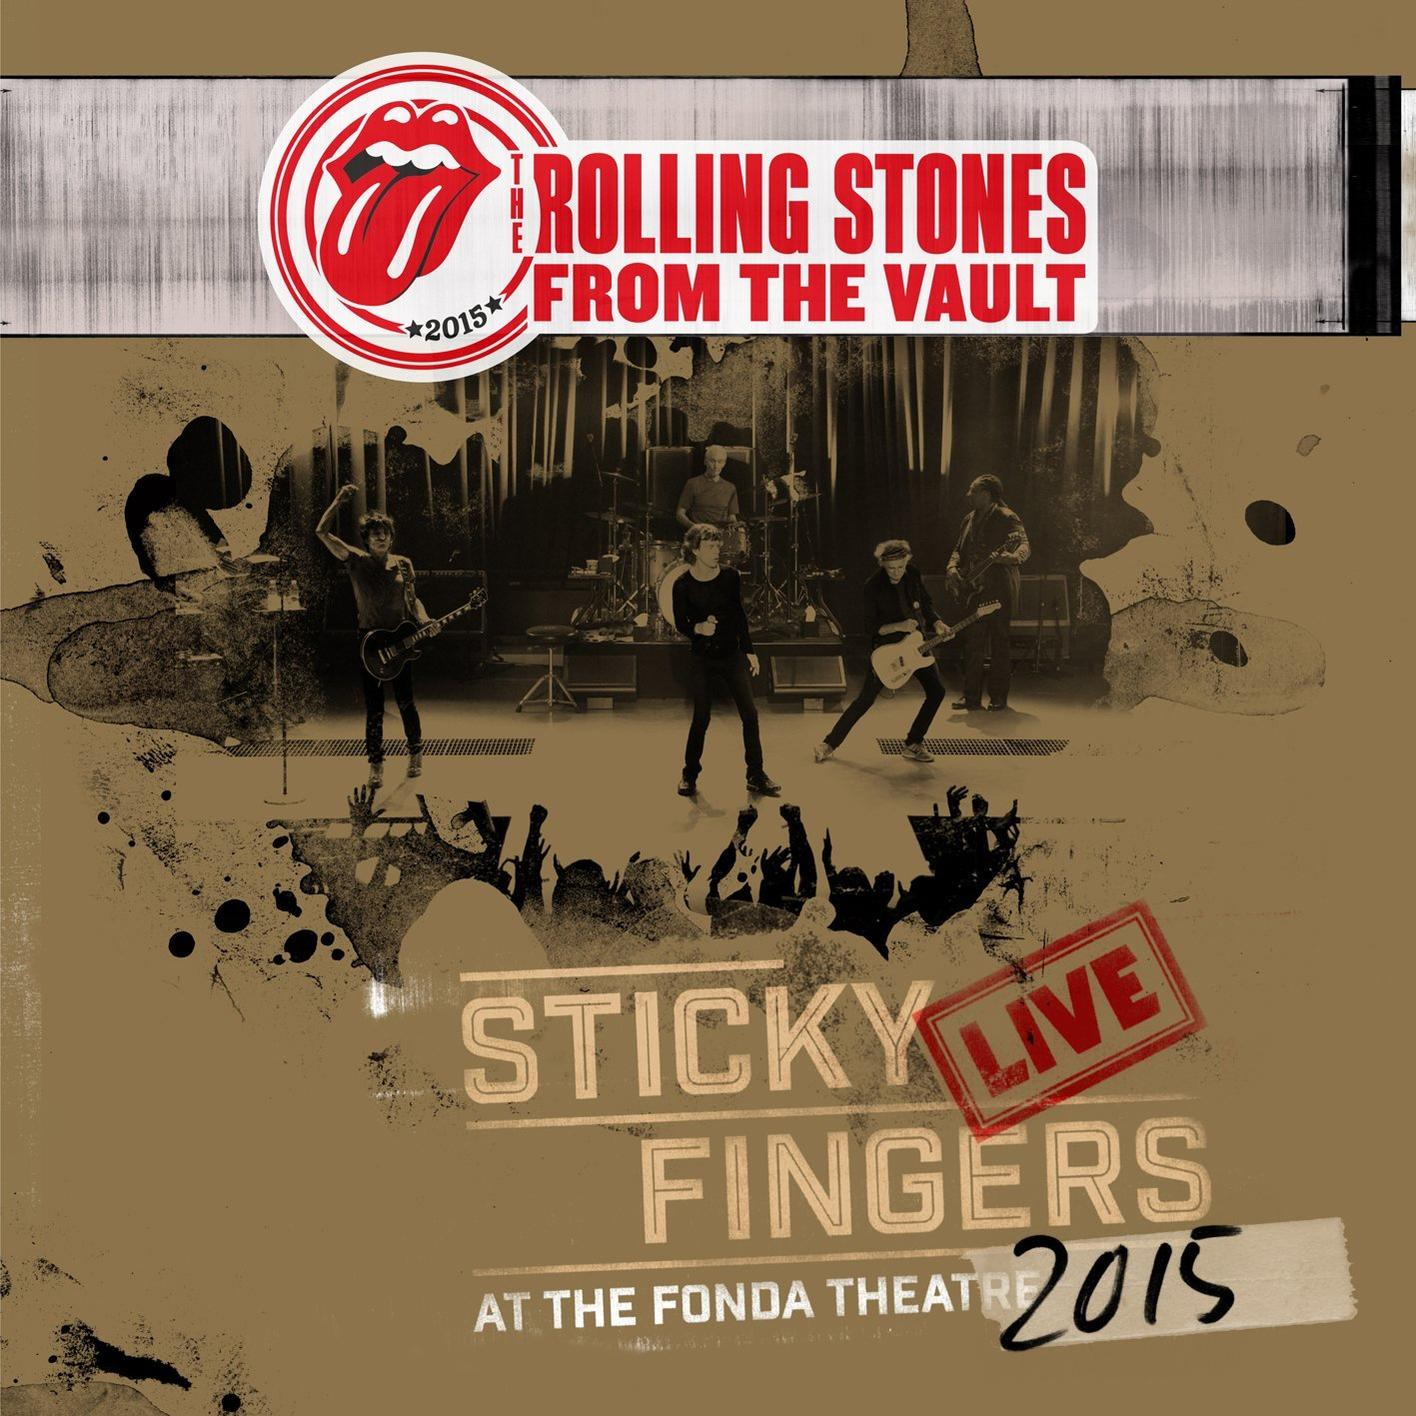 The Rolling Vault: From - 2015 (LP DVD The Live Fingers (DVD+3LP) Video) Stones - + Sticky